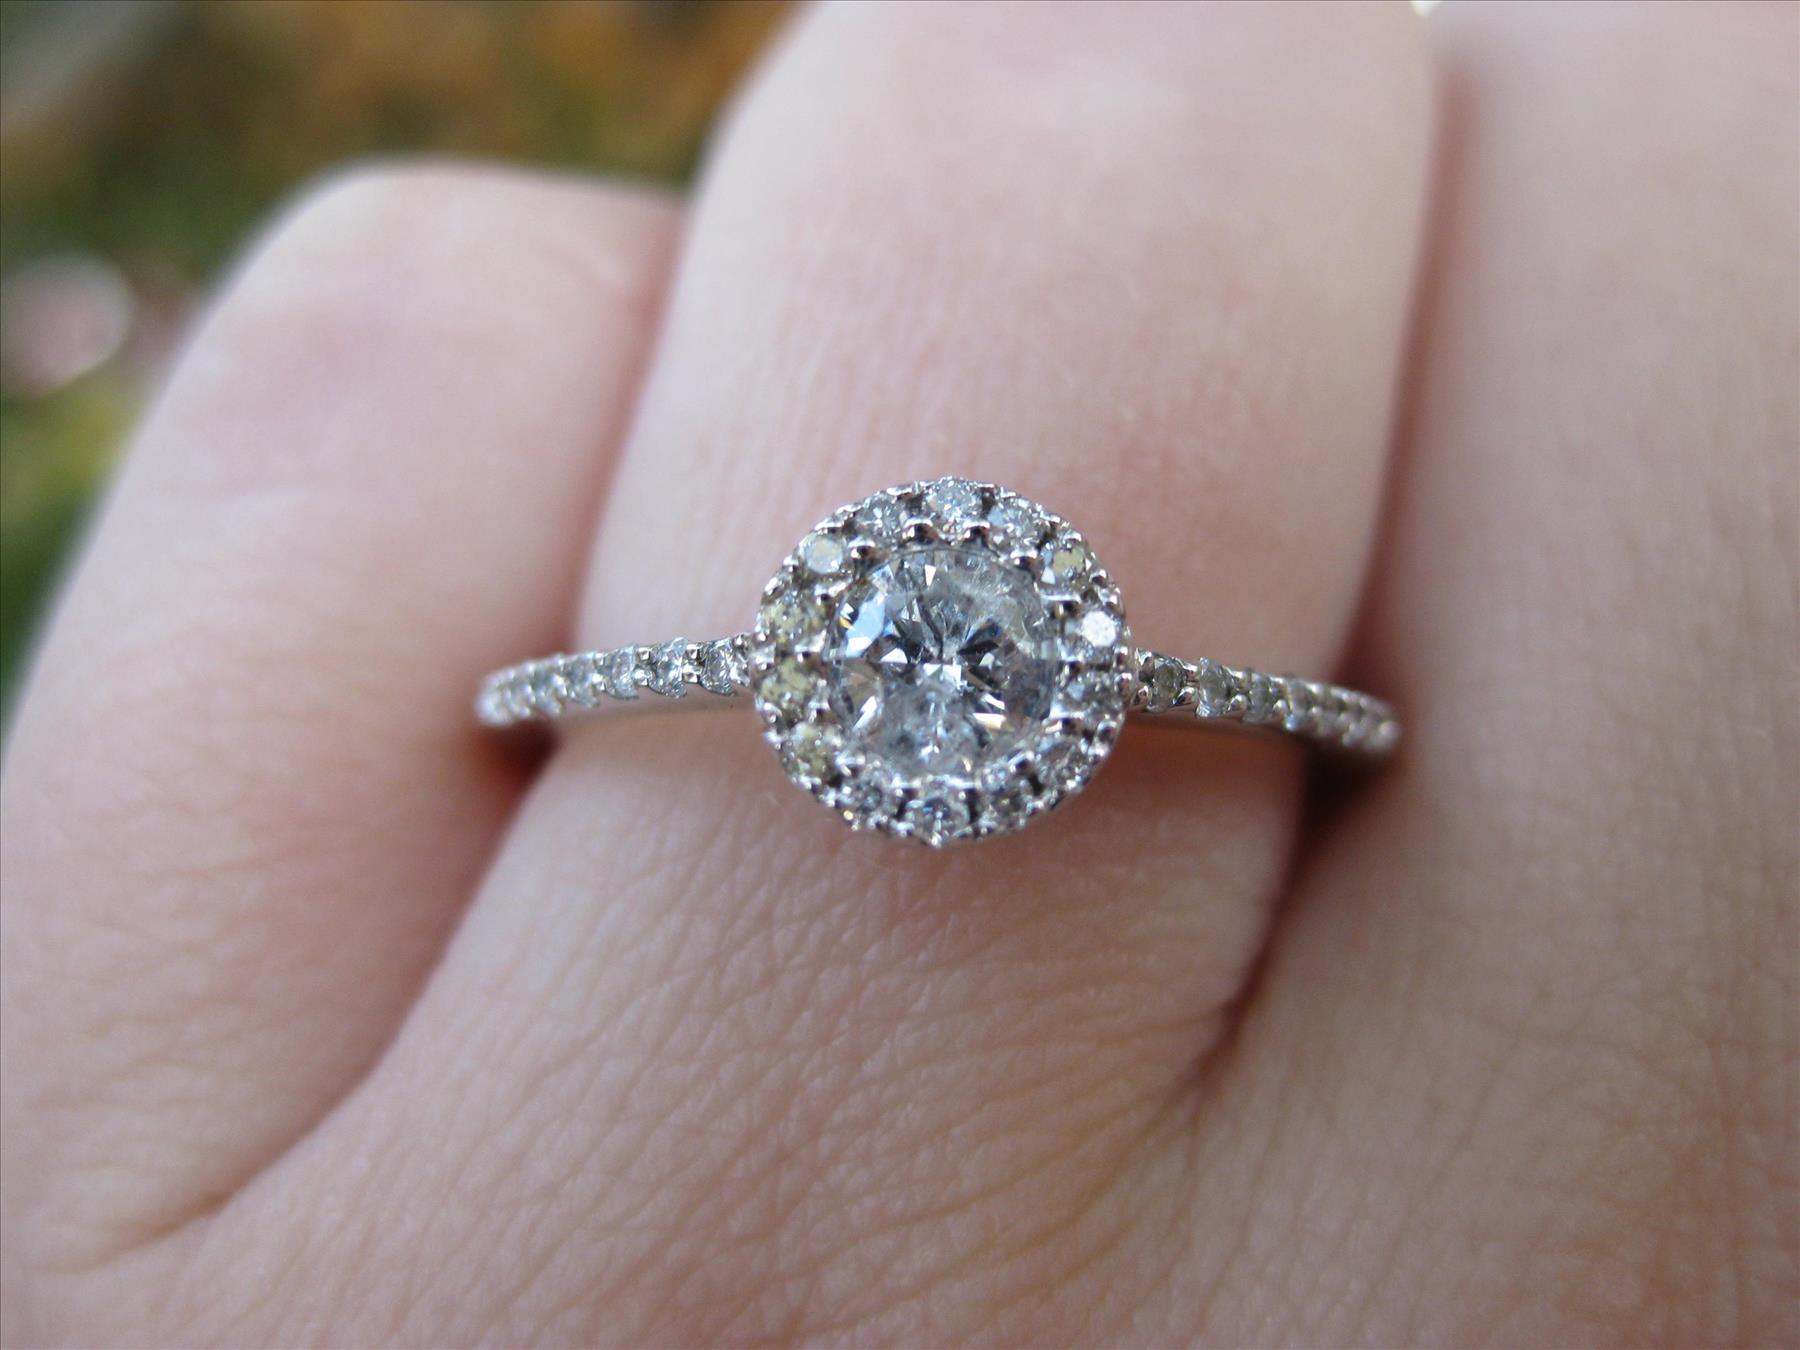 Researching an engagement ring